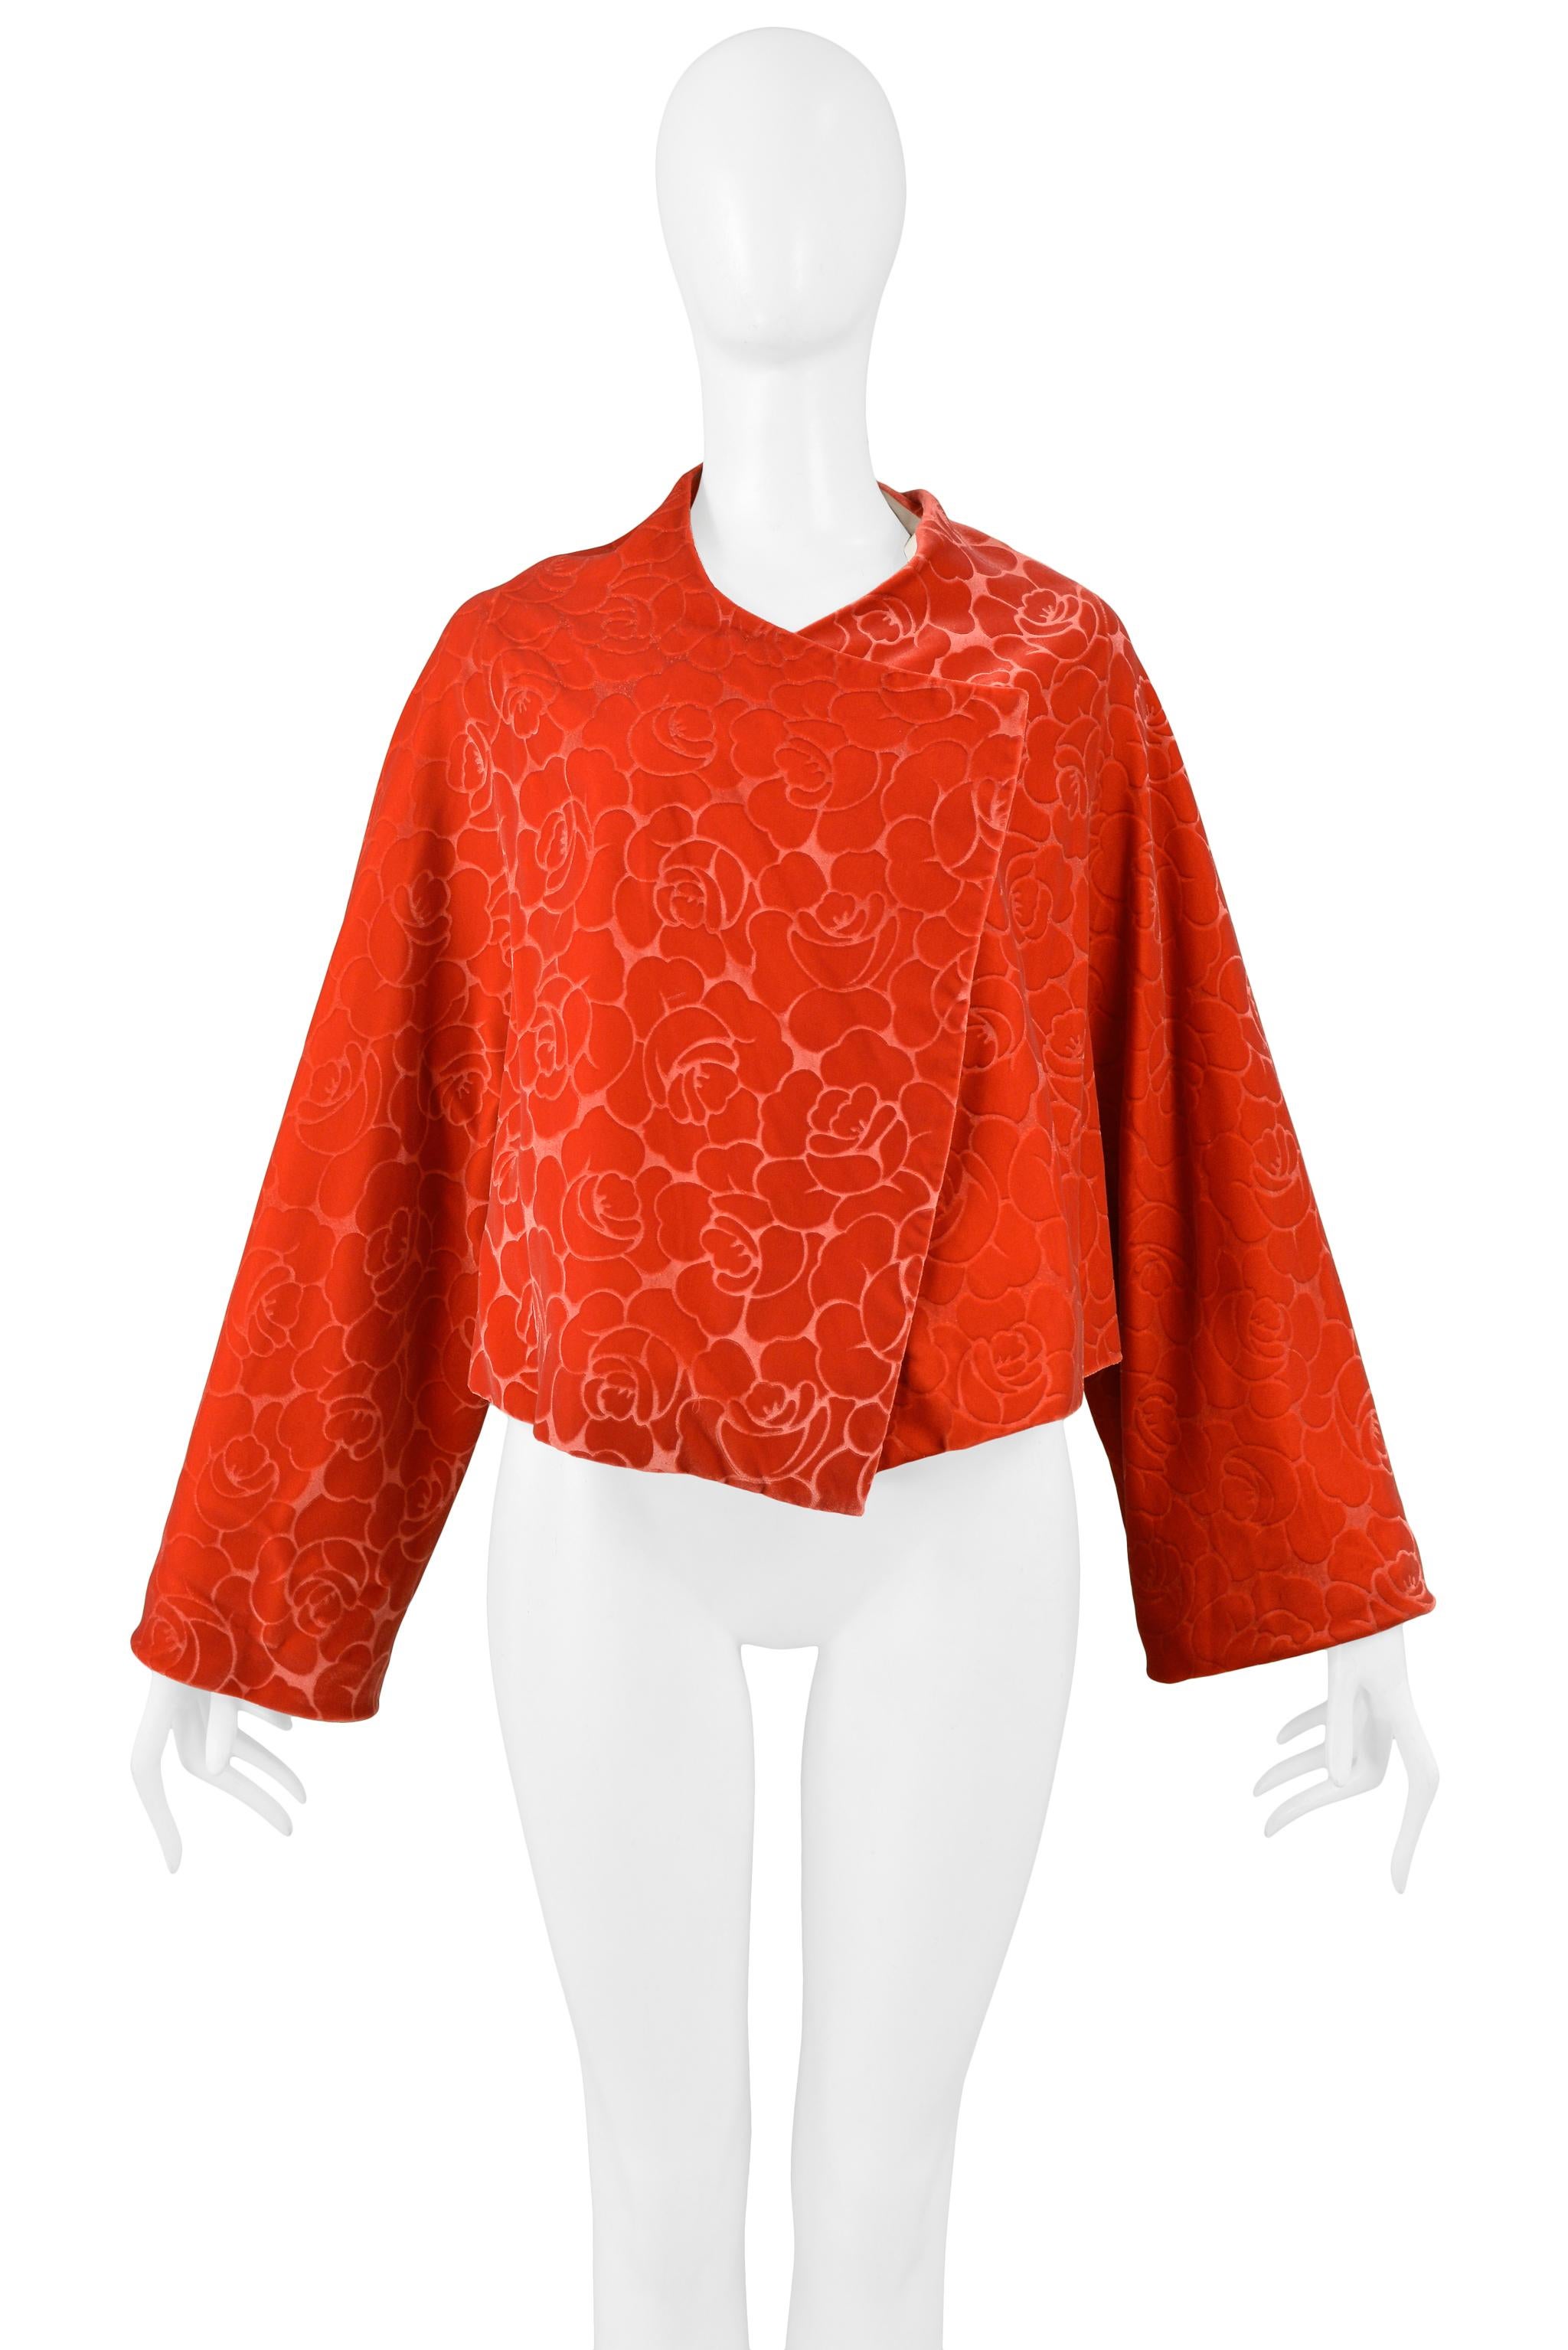 Resurrection Vintage is excited to offer a vintage Comme des Garcons red-orange floral kimono style jacket featuring a trapeze shape body, velvet burnout fabric, extra long sleeves, and natural color muslin lining. From the 1996 collection. 

Comme